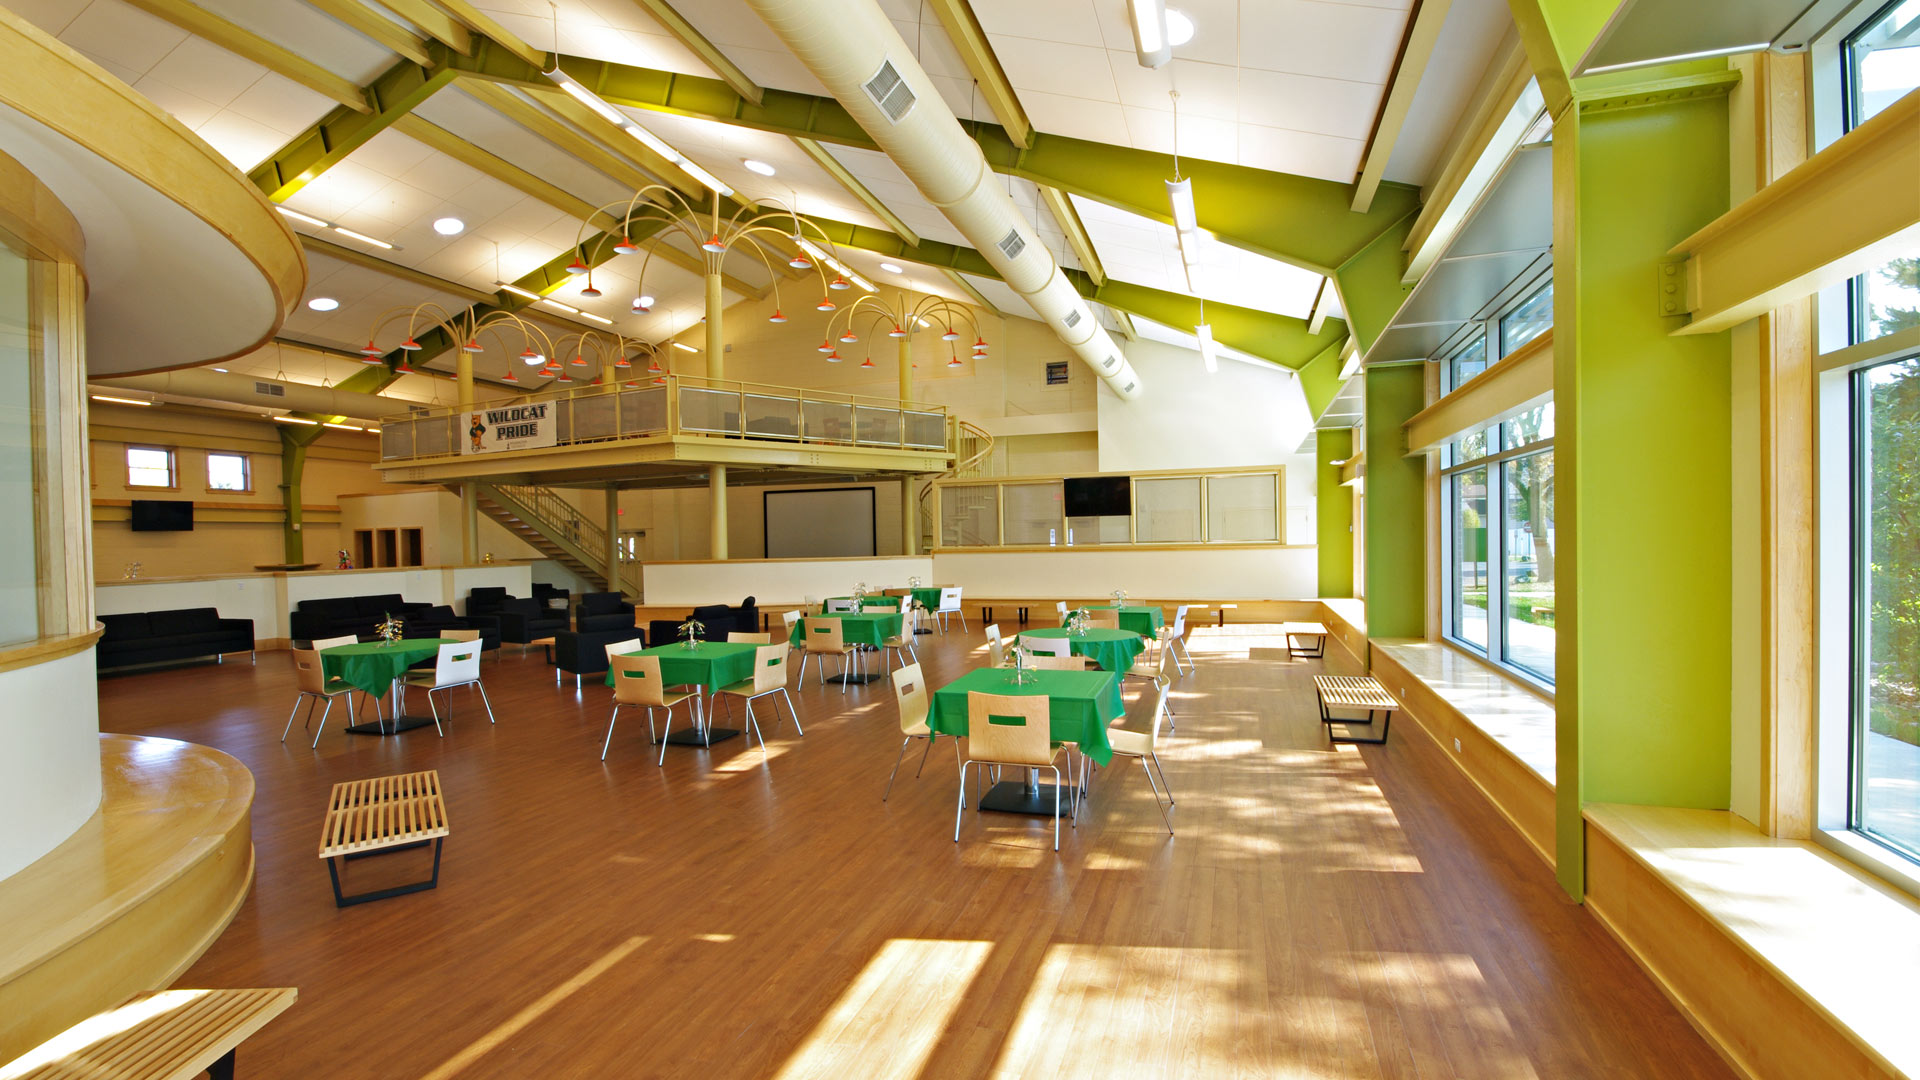 Student center interior with tree house